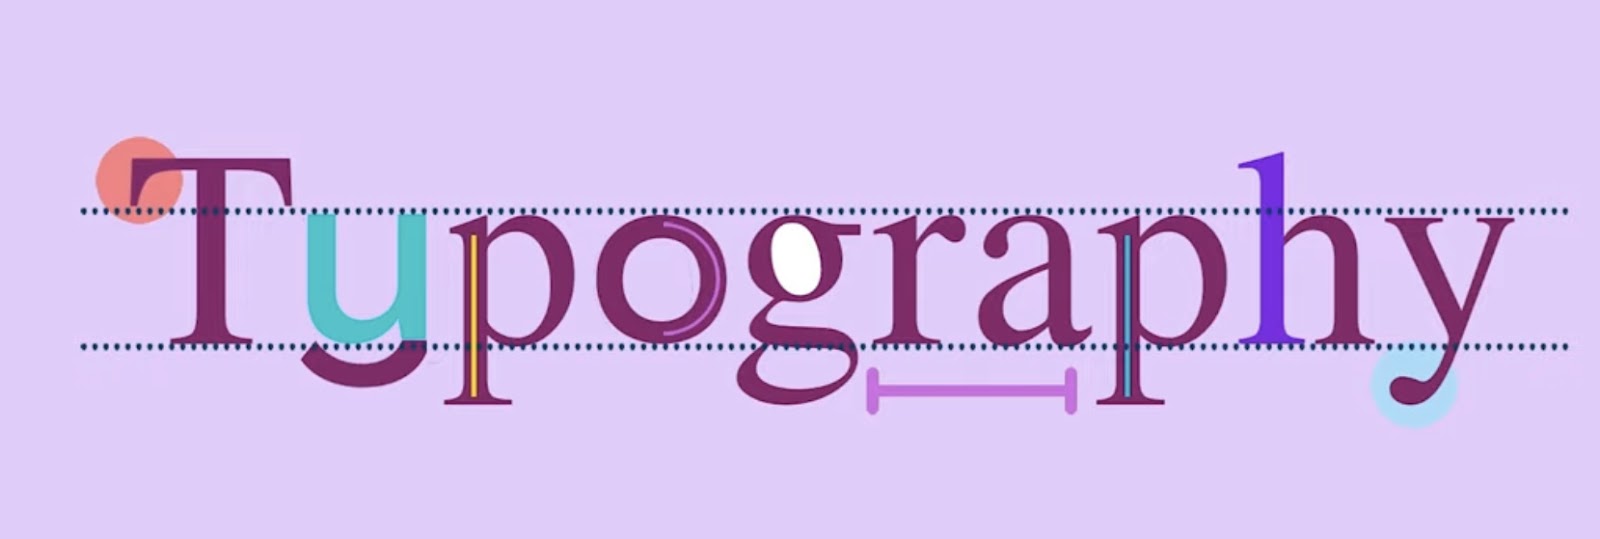 Word "Typography" with each letter decorated with various graphic elements on a purple background